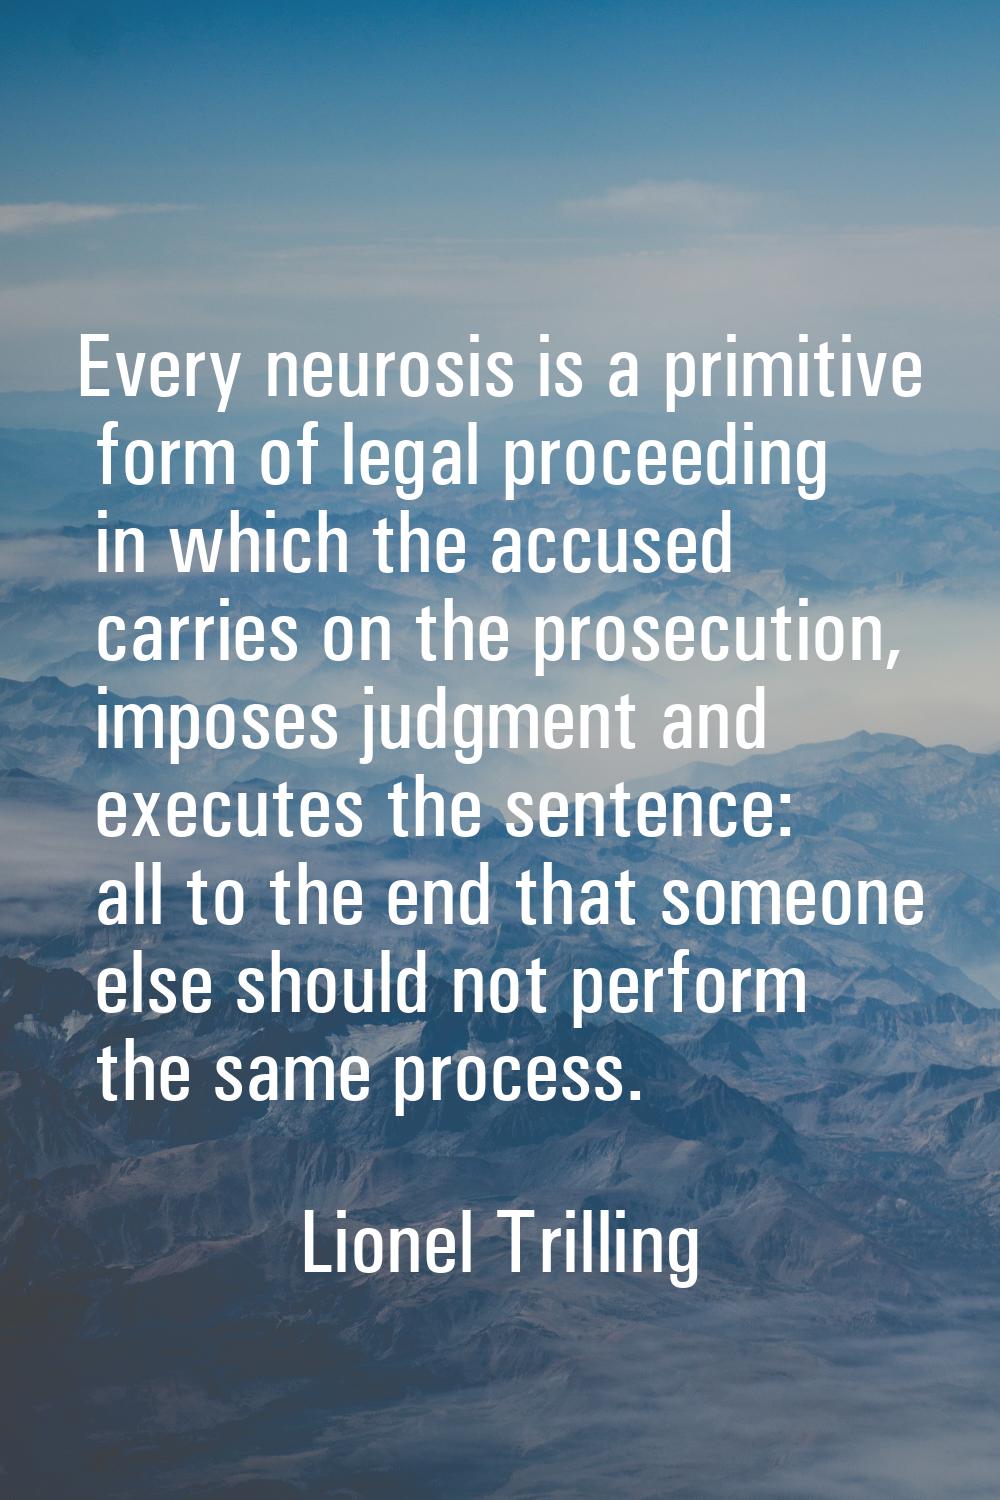 Every neurosis is a primitive form of legal proceeding in which the accused carries on the prosecut